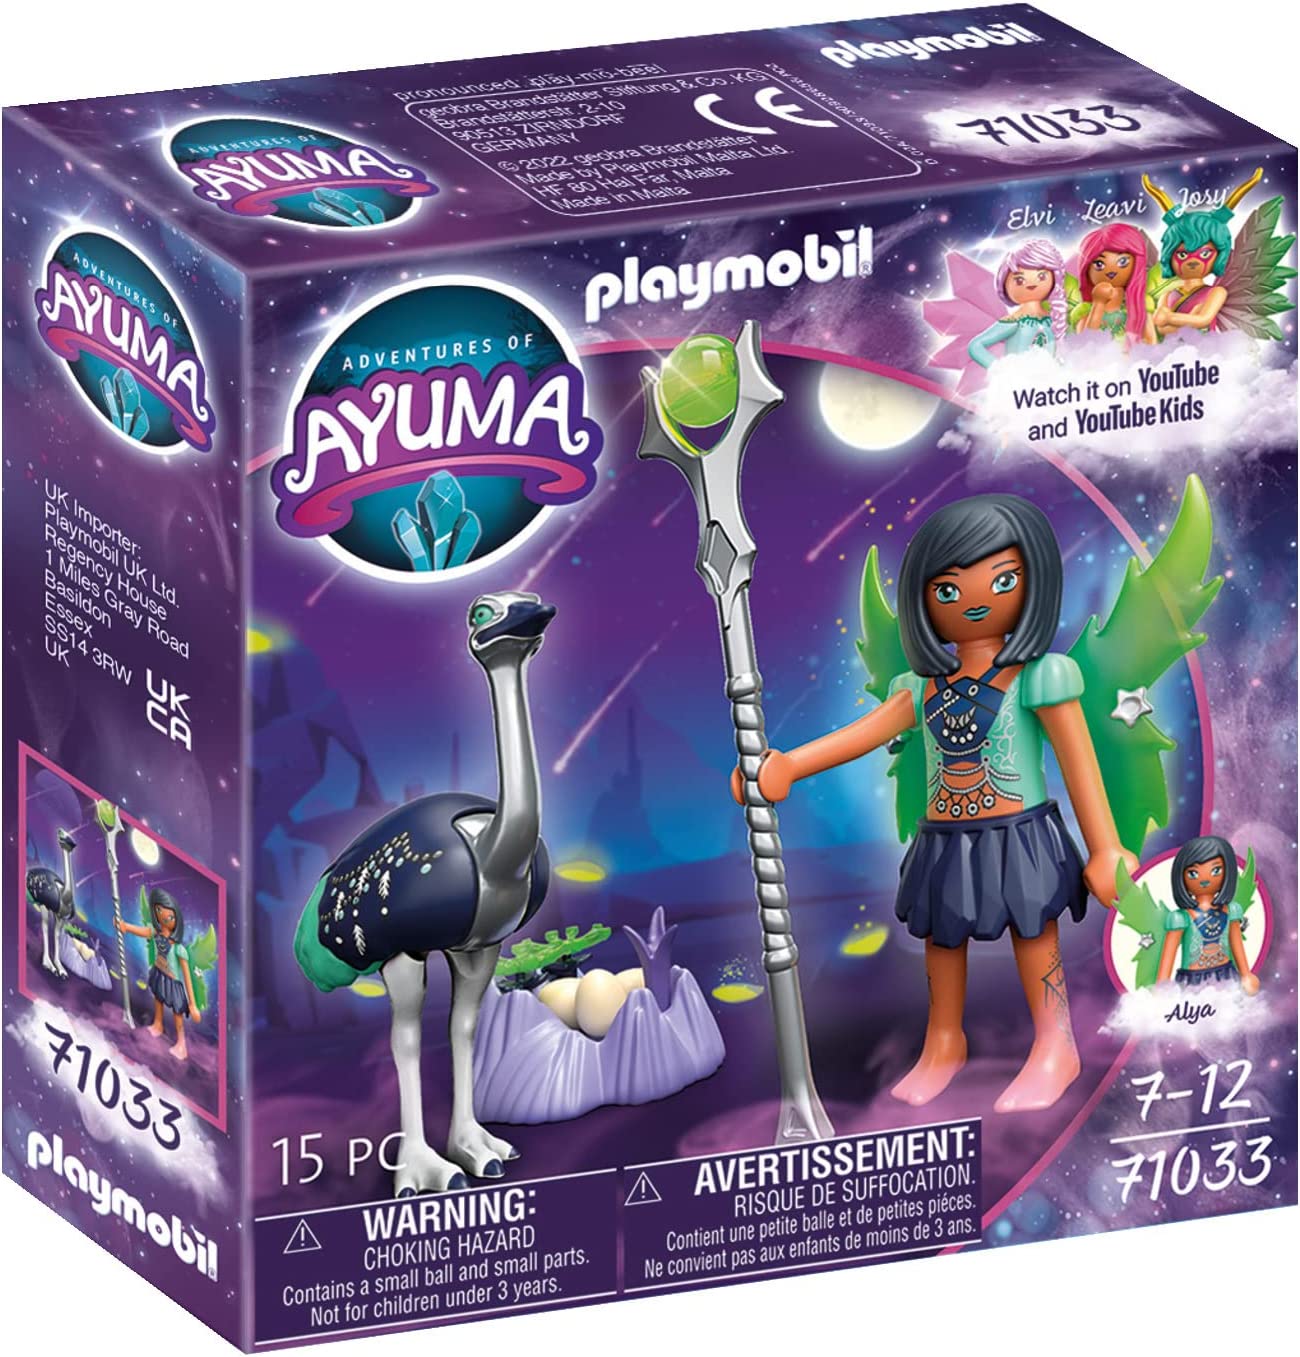 PLAYMOBIL Adventures of Ayuma 71033 Moon Fairy with Soul Animals, Includes Toy Fairy with Moving Fairy Wings, Fairy Toy for Children from 7 Years